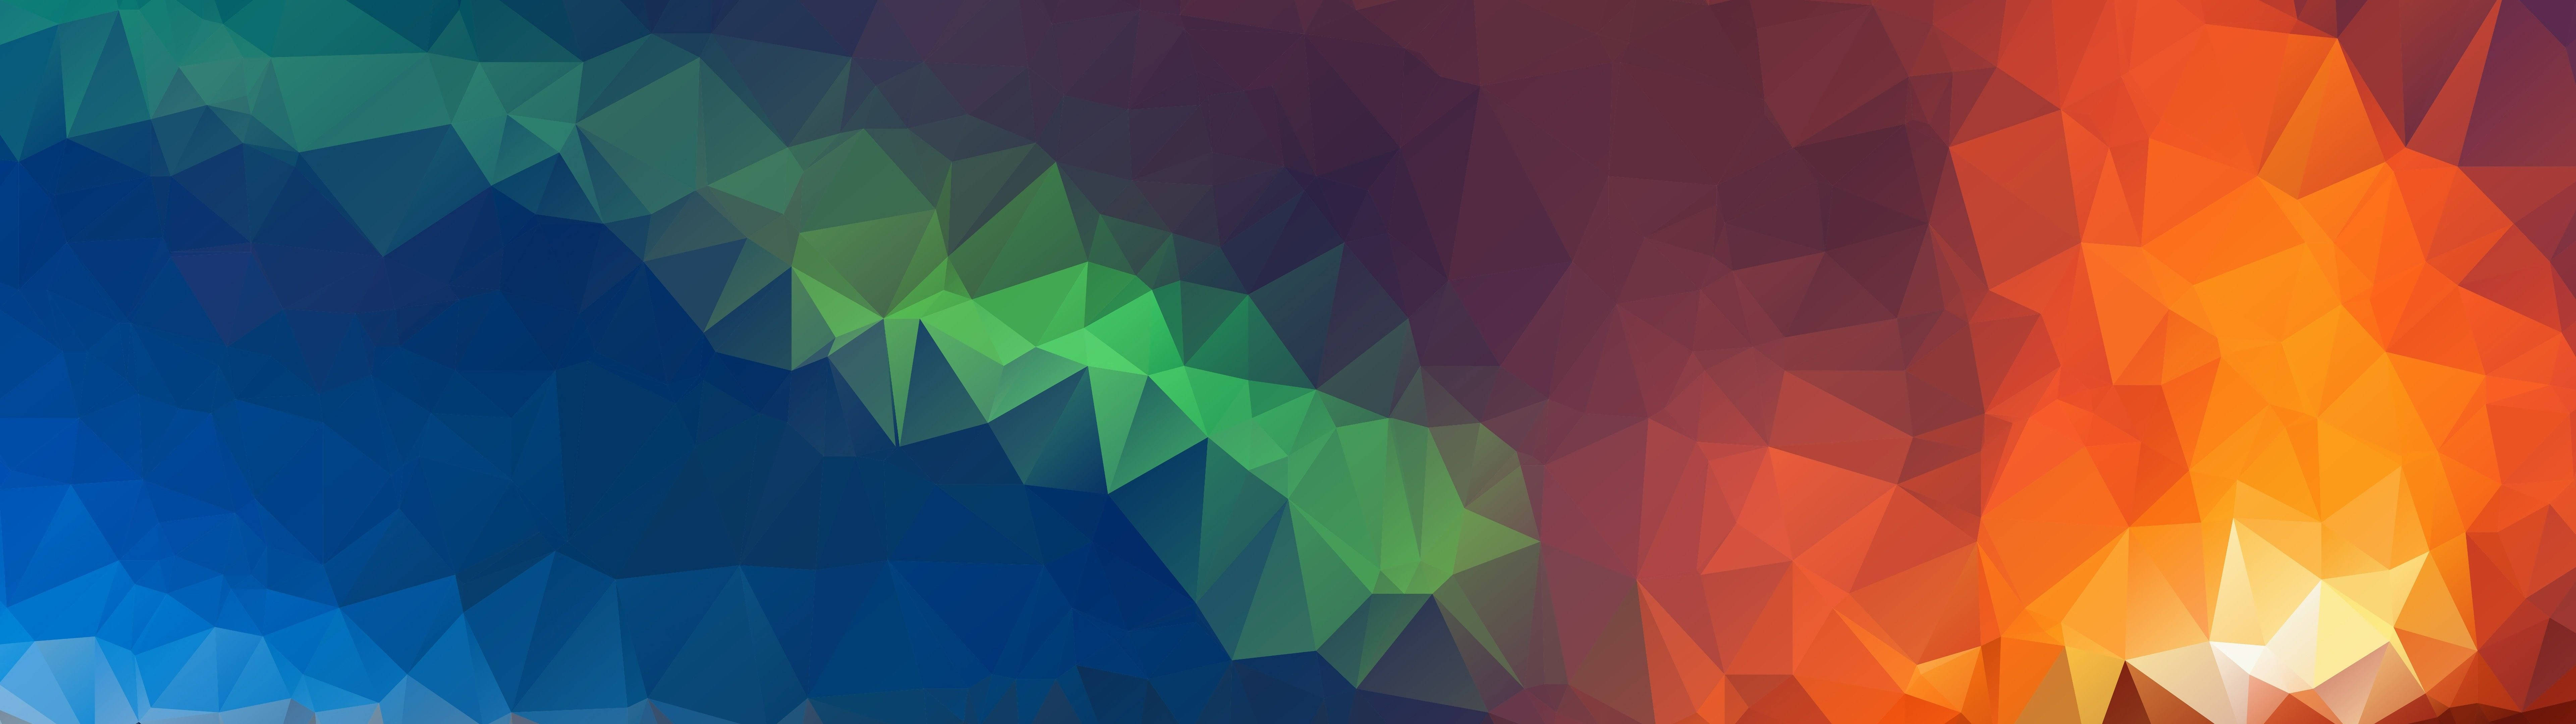 Abstract art with polygon patterns wallpaper.